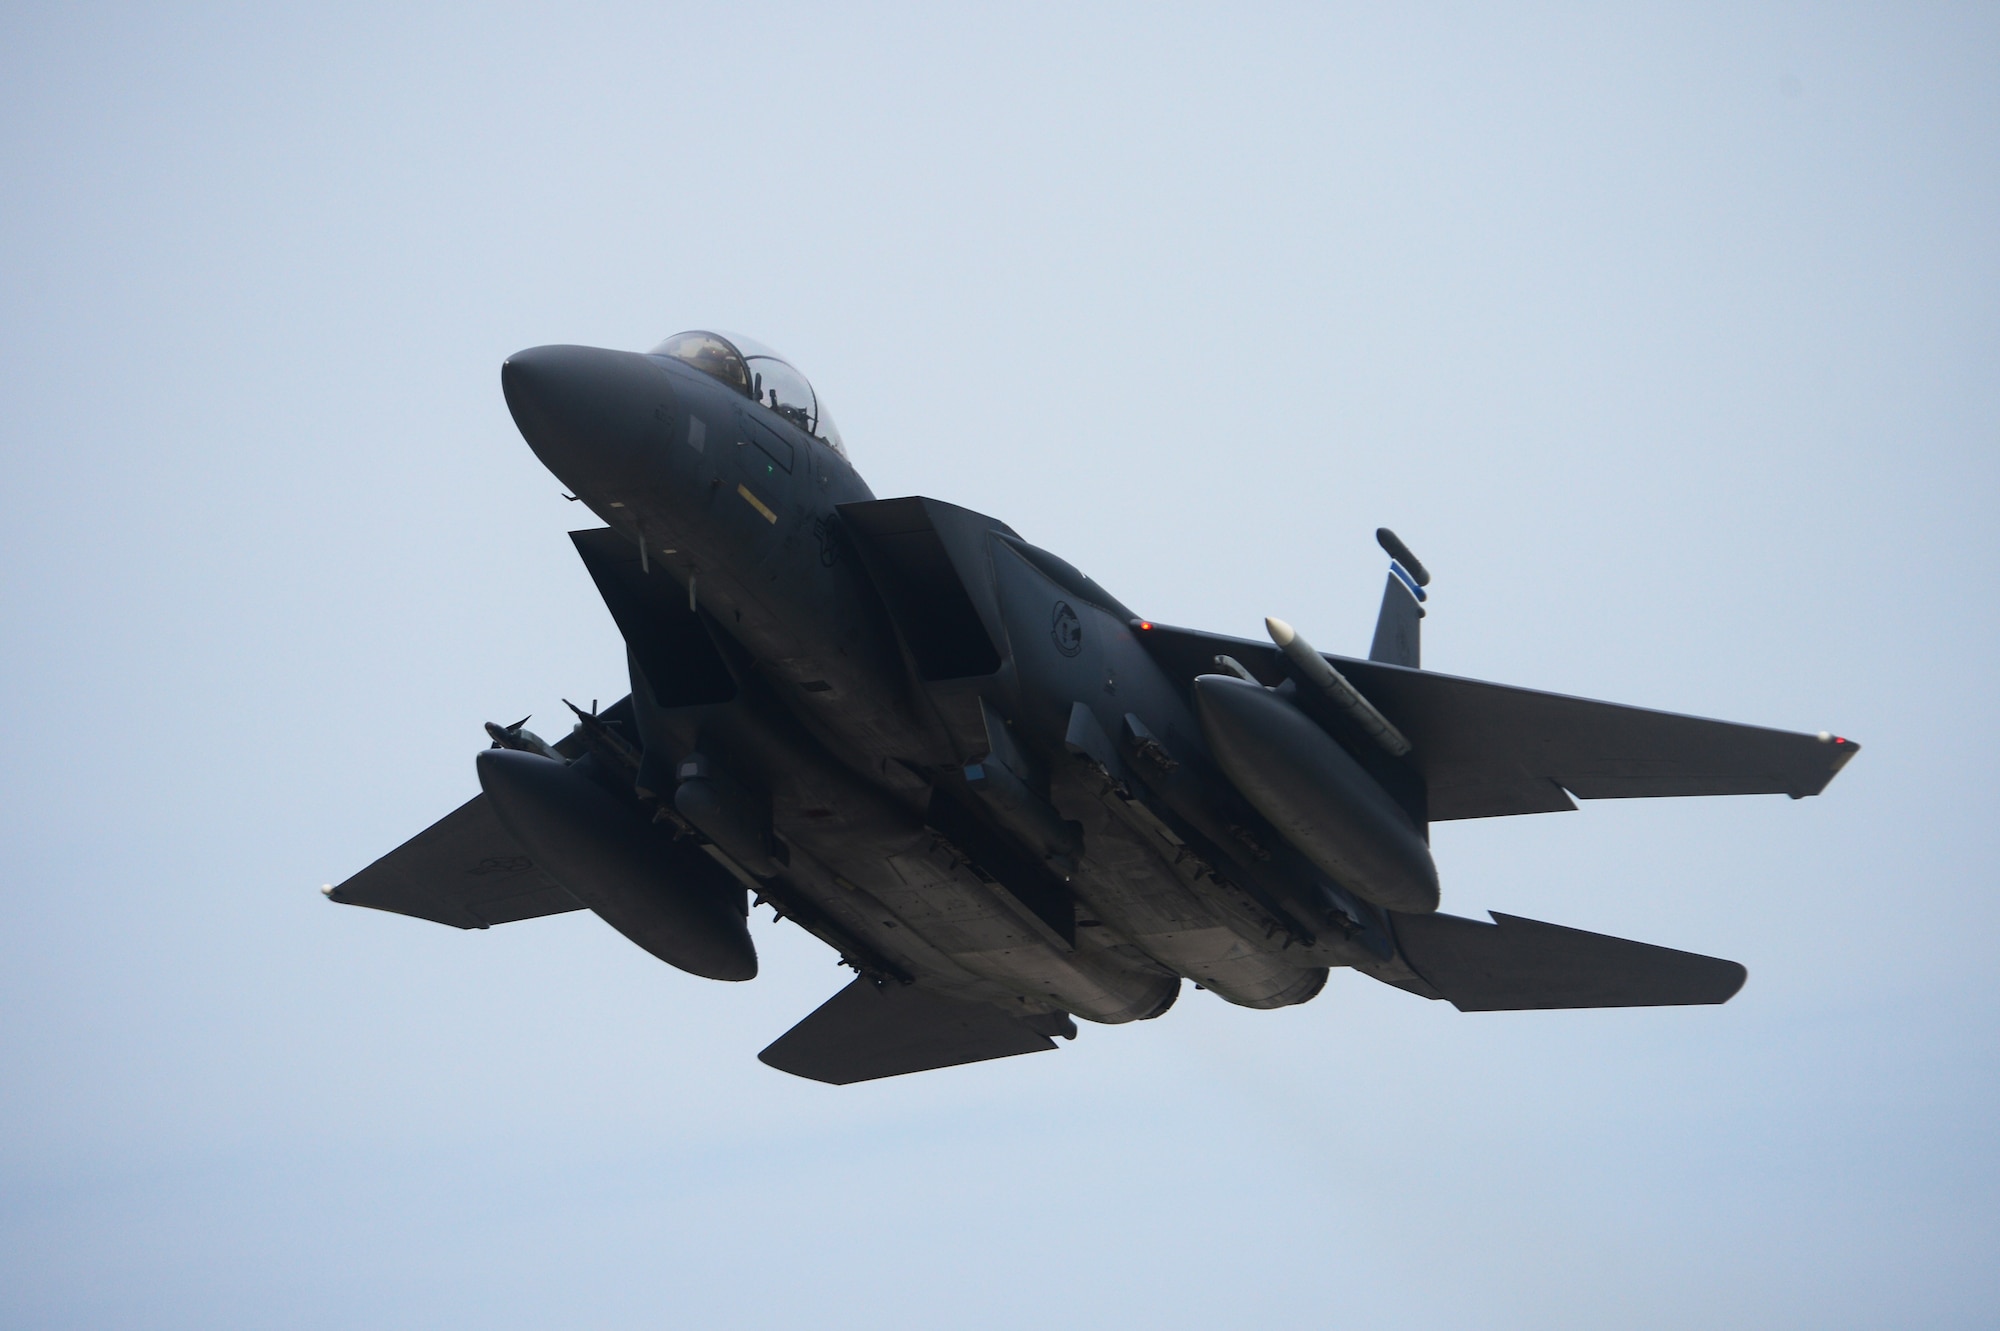 An F-15E Strike Eagle assigned to the 492nd Fighter Squadron, Royal Air Force Lakenheath, England flies over Andravida Air Base, Greece, March 21, 2018, during exercise INIOHOS 18. INIOHOS 18 is a Hellenic Air Force-led, large force flying exercise focused on strengthening partnerships and interoperability. (U.S. Air Force photo/1st Lt. Elias Small)